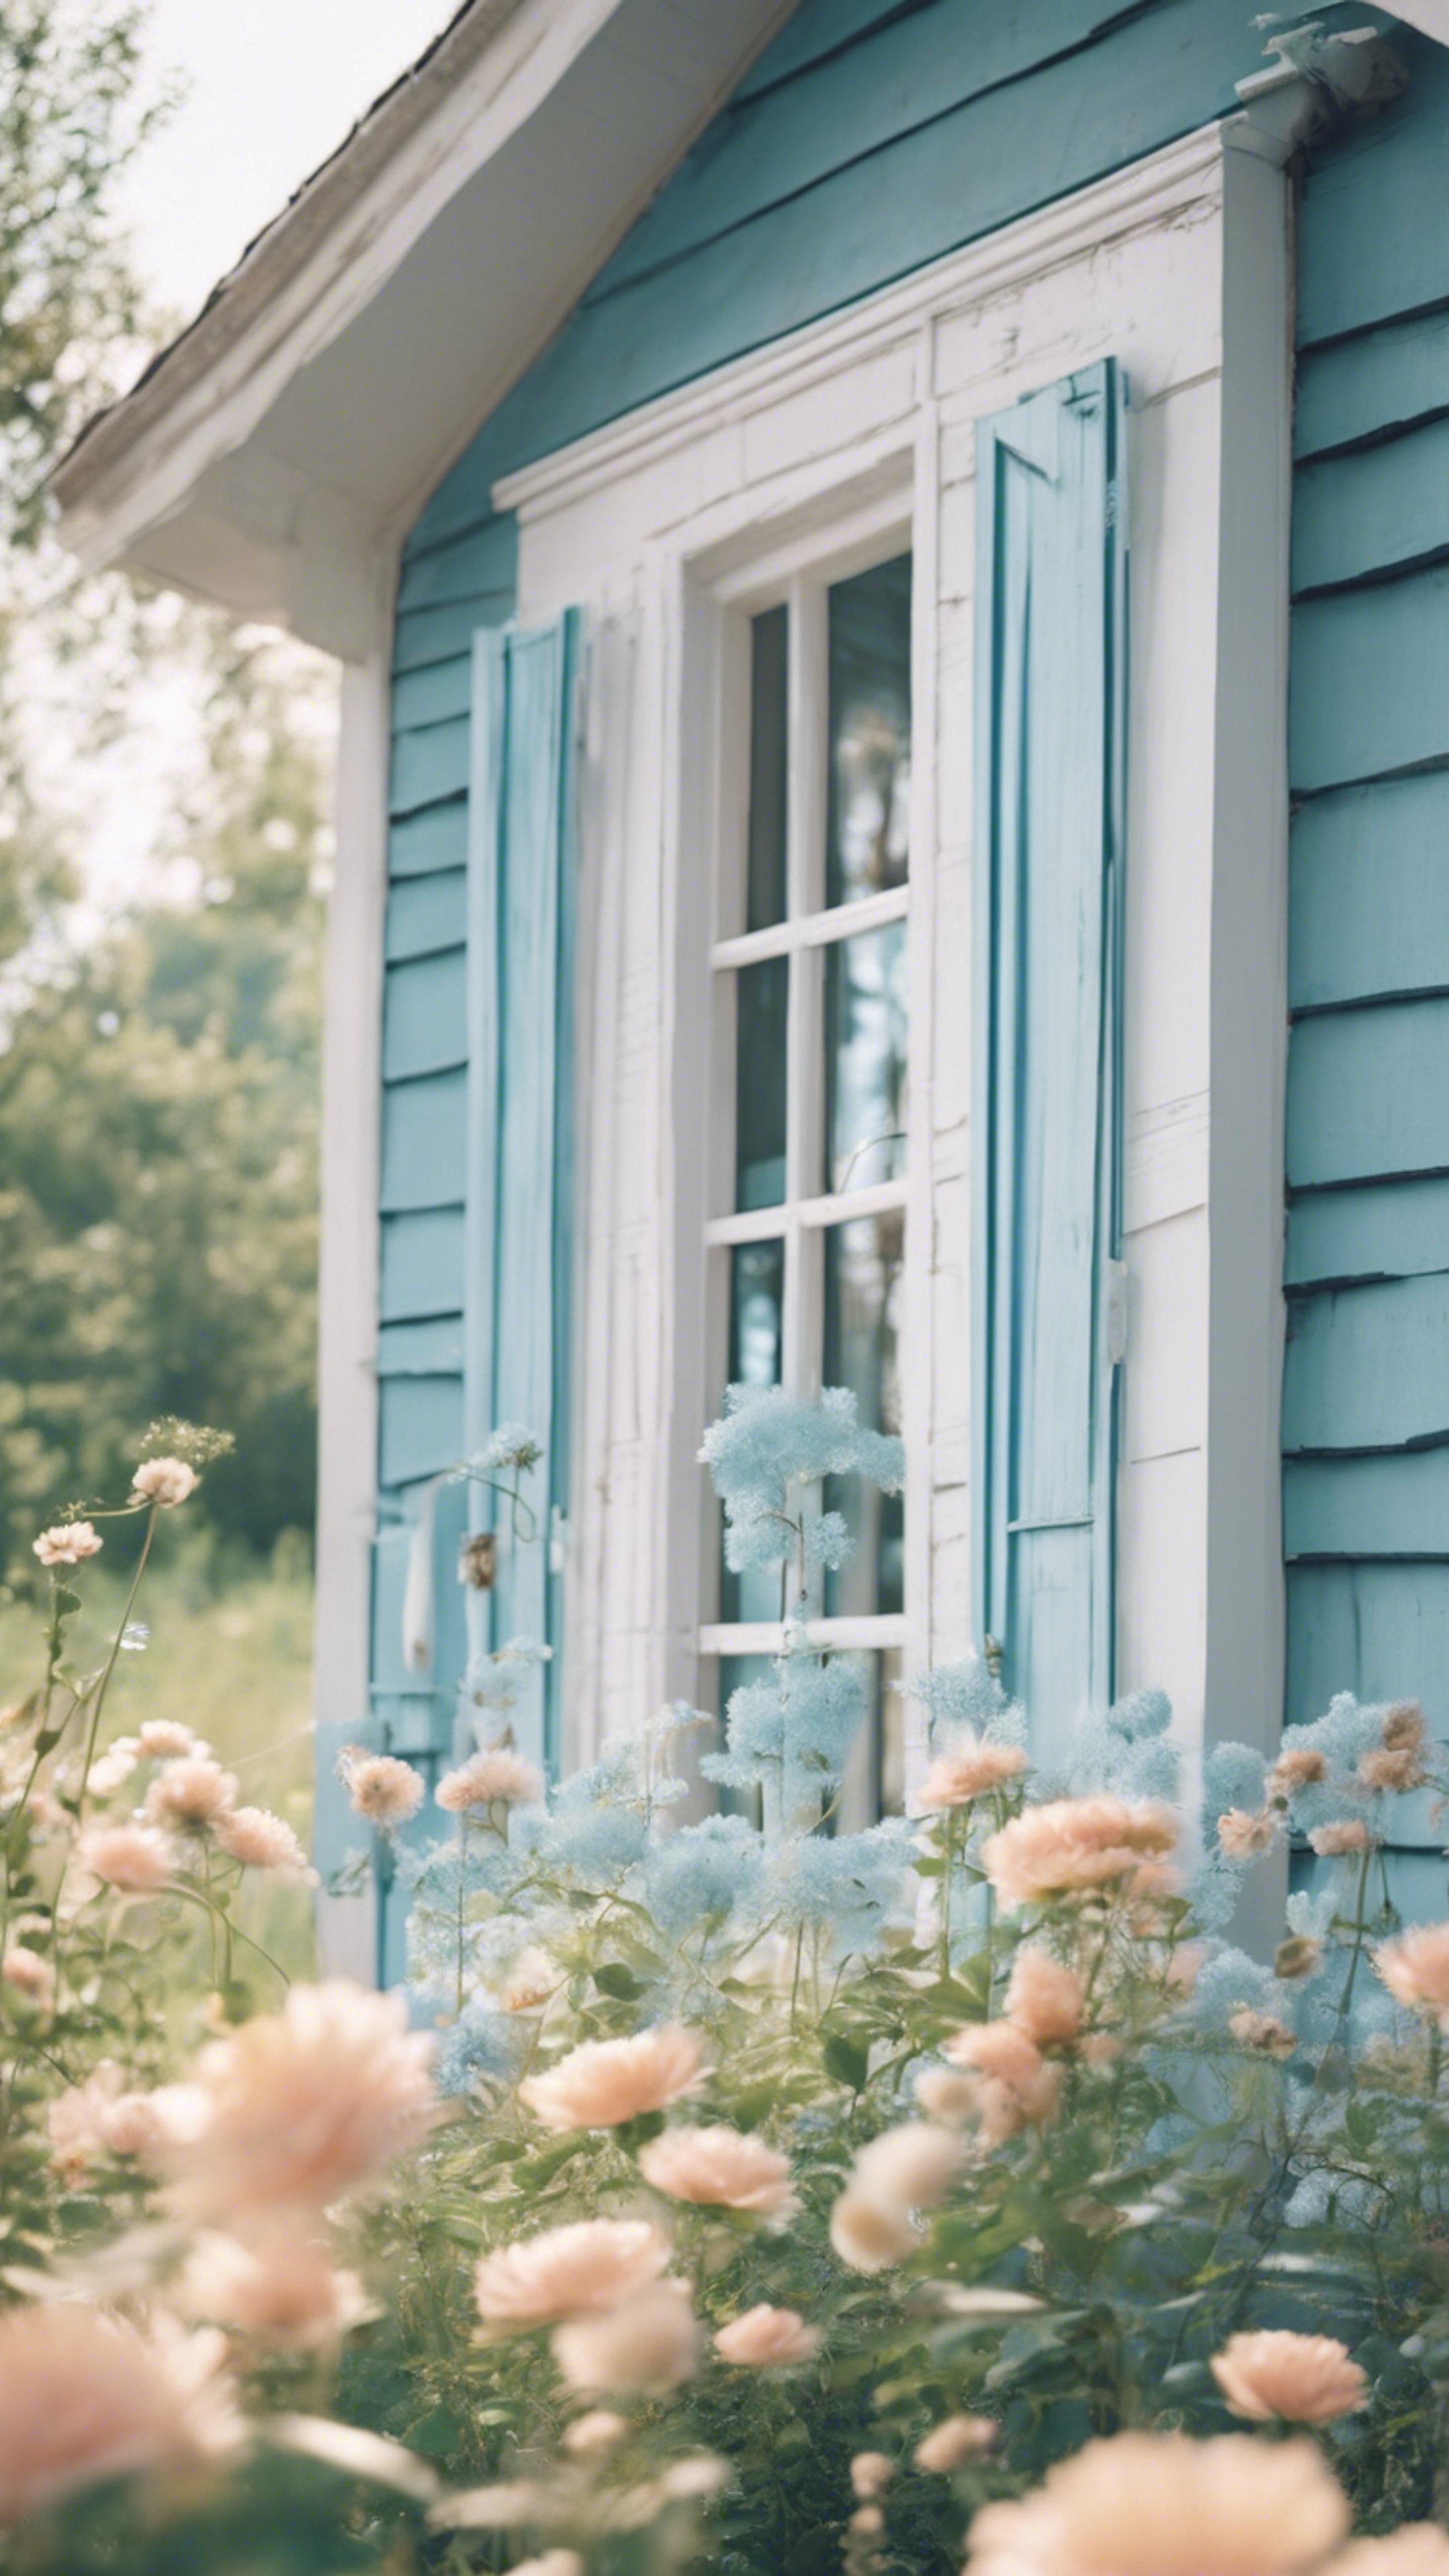 Preppy pastel blue summer farmhouse with white wooden windows. Wallpaper[48dc49ad1a9b4a7c9166]